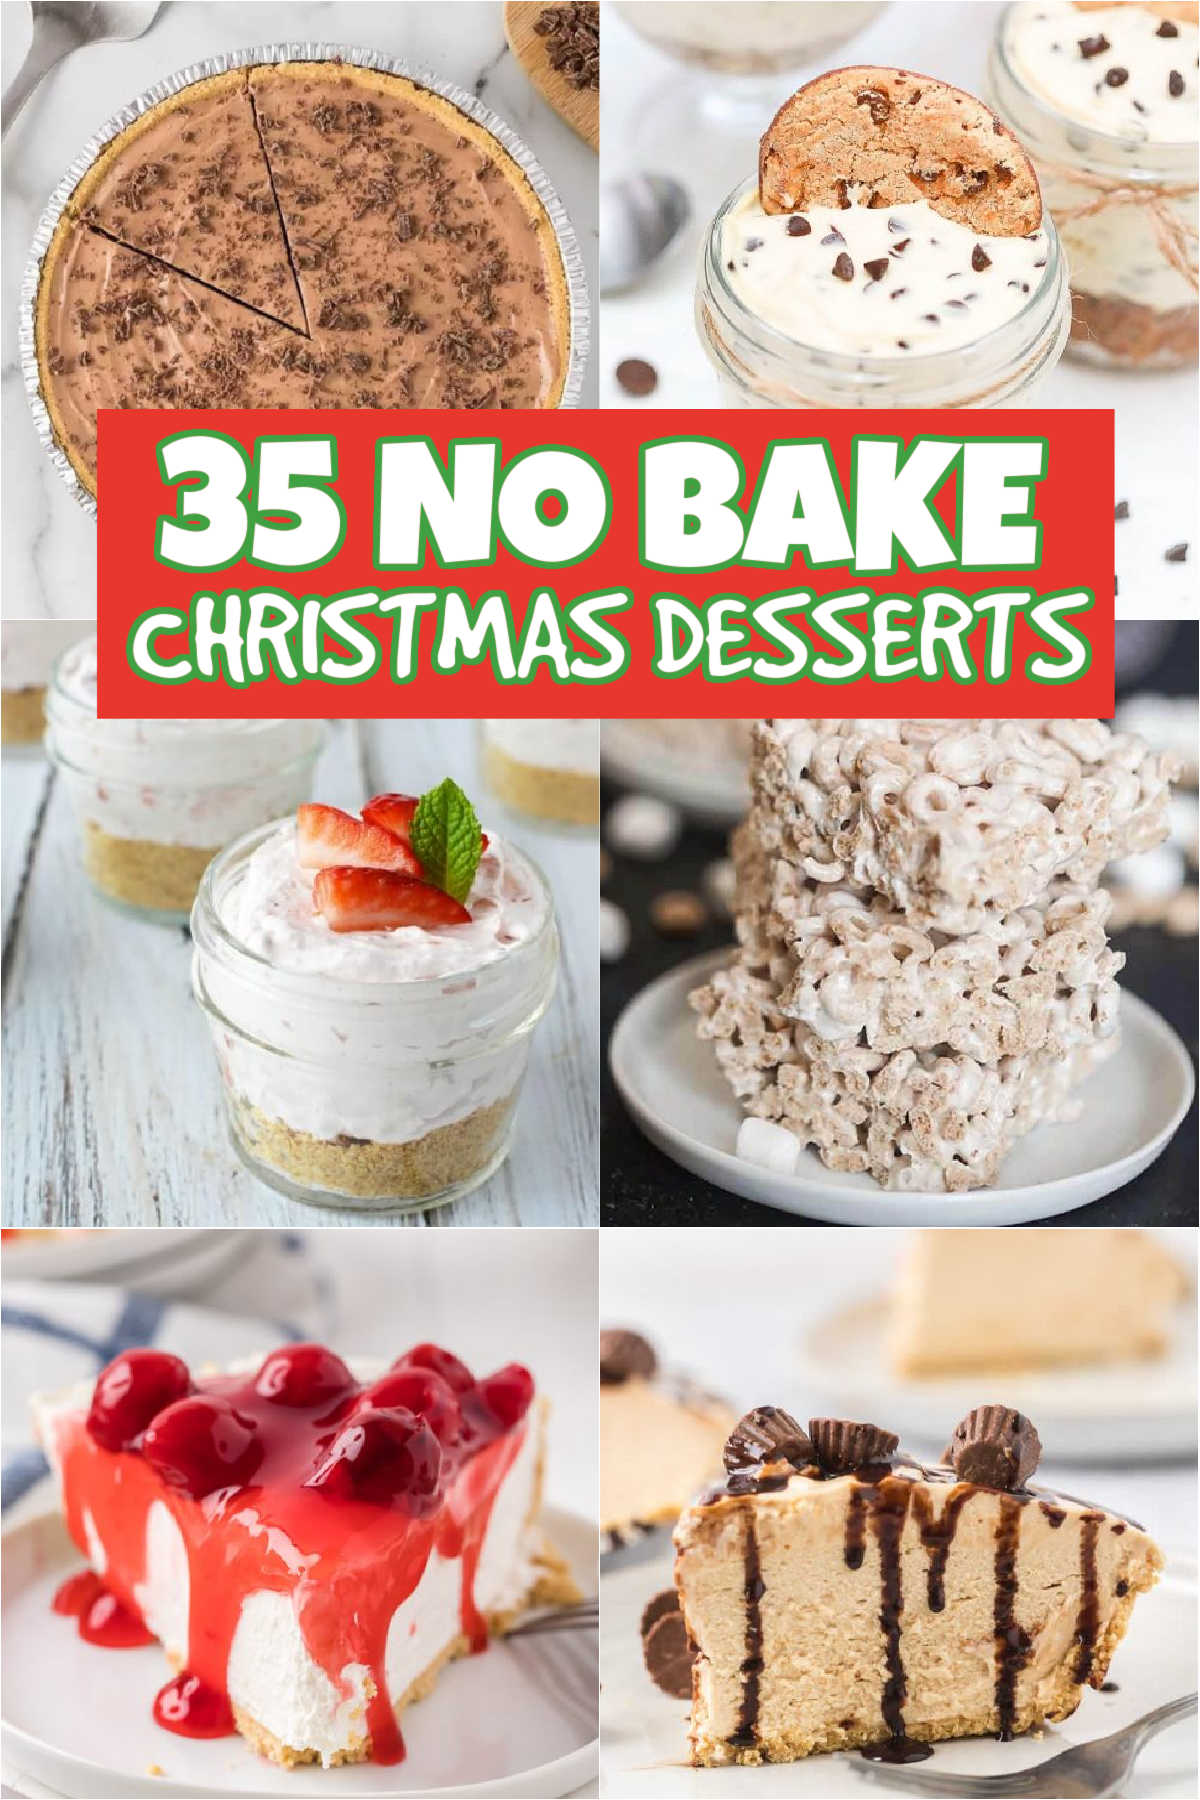 These No Bake Christmas Desserts are perfect for all your holiday parties. They are made with simple ingredients and are loaded with flavor. These Christmas No Bake Desserts make the perfect holiday treat for the holiday season. From no bake pie that is made with a Oreo cookie crust to peppermint bark. These no bake recipes will become your new holiday favorite. #eatingonadime #nobakechristmasdesserts #christmasdesserts